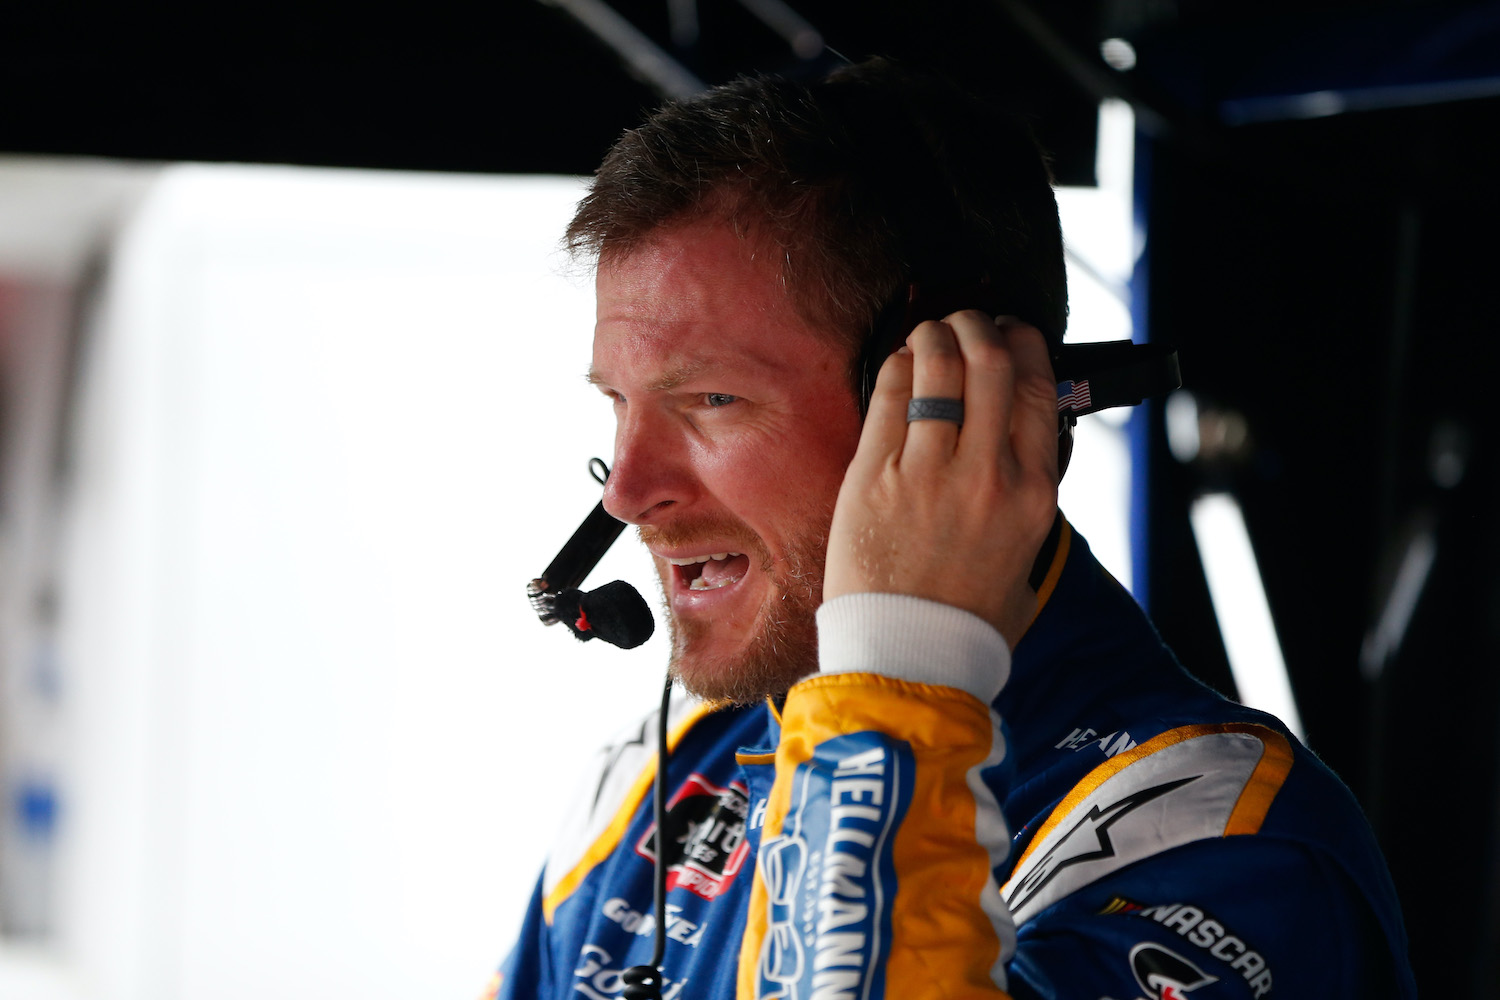 Dale Earnhardt Jr. Admits That He Was ‘Not Really’ Satisfied With Jimmy Spencer’s Response to Questions About His Controversial 2001 Comments